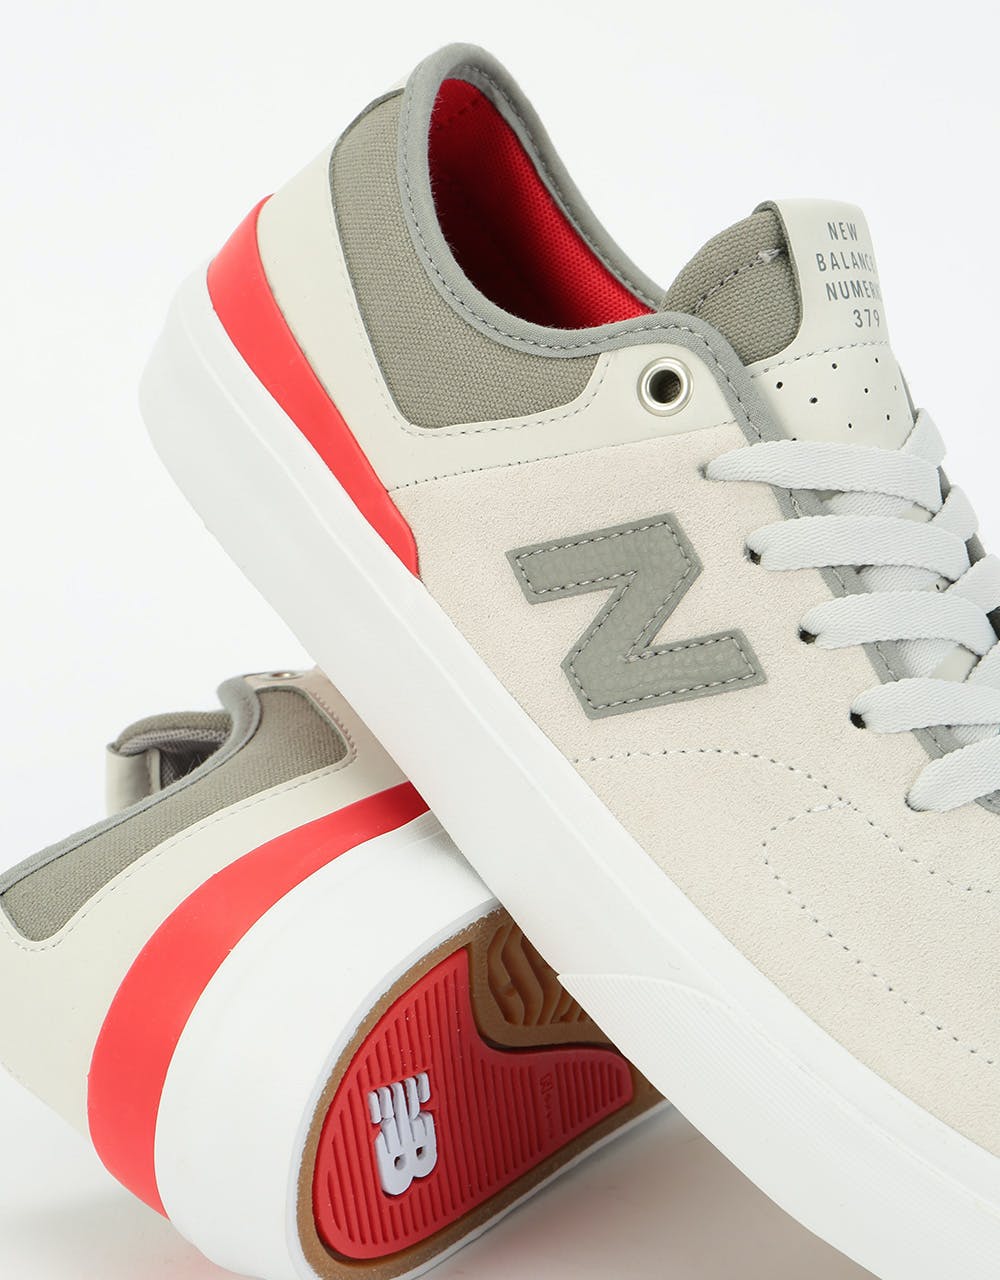 New Balance Numeric 379 Skate Shoes - Grey/Red